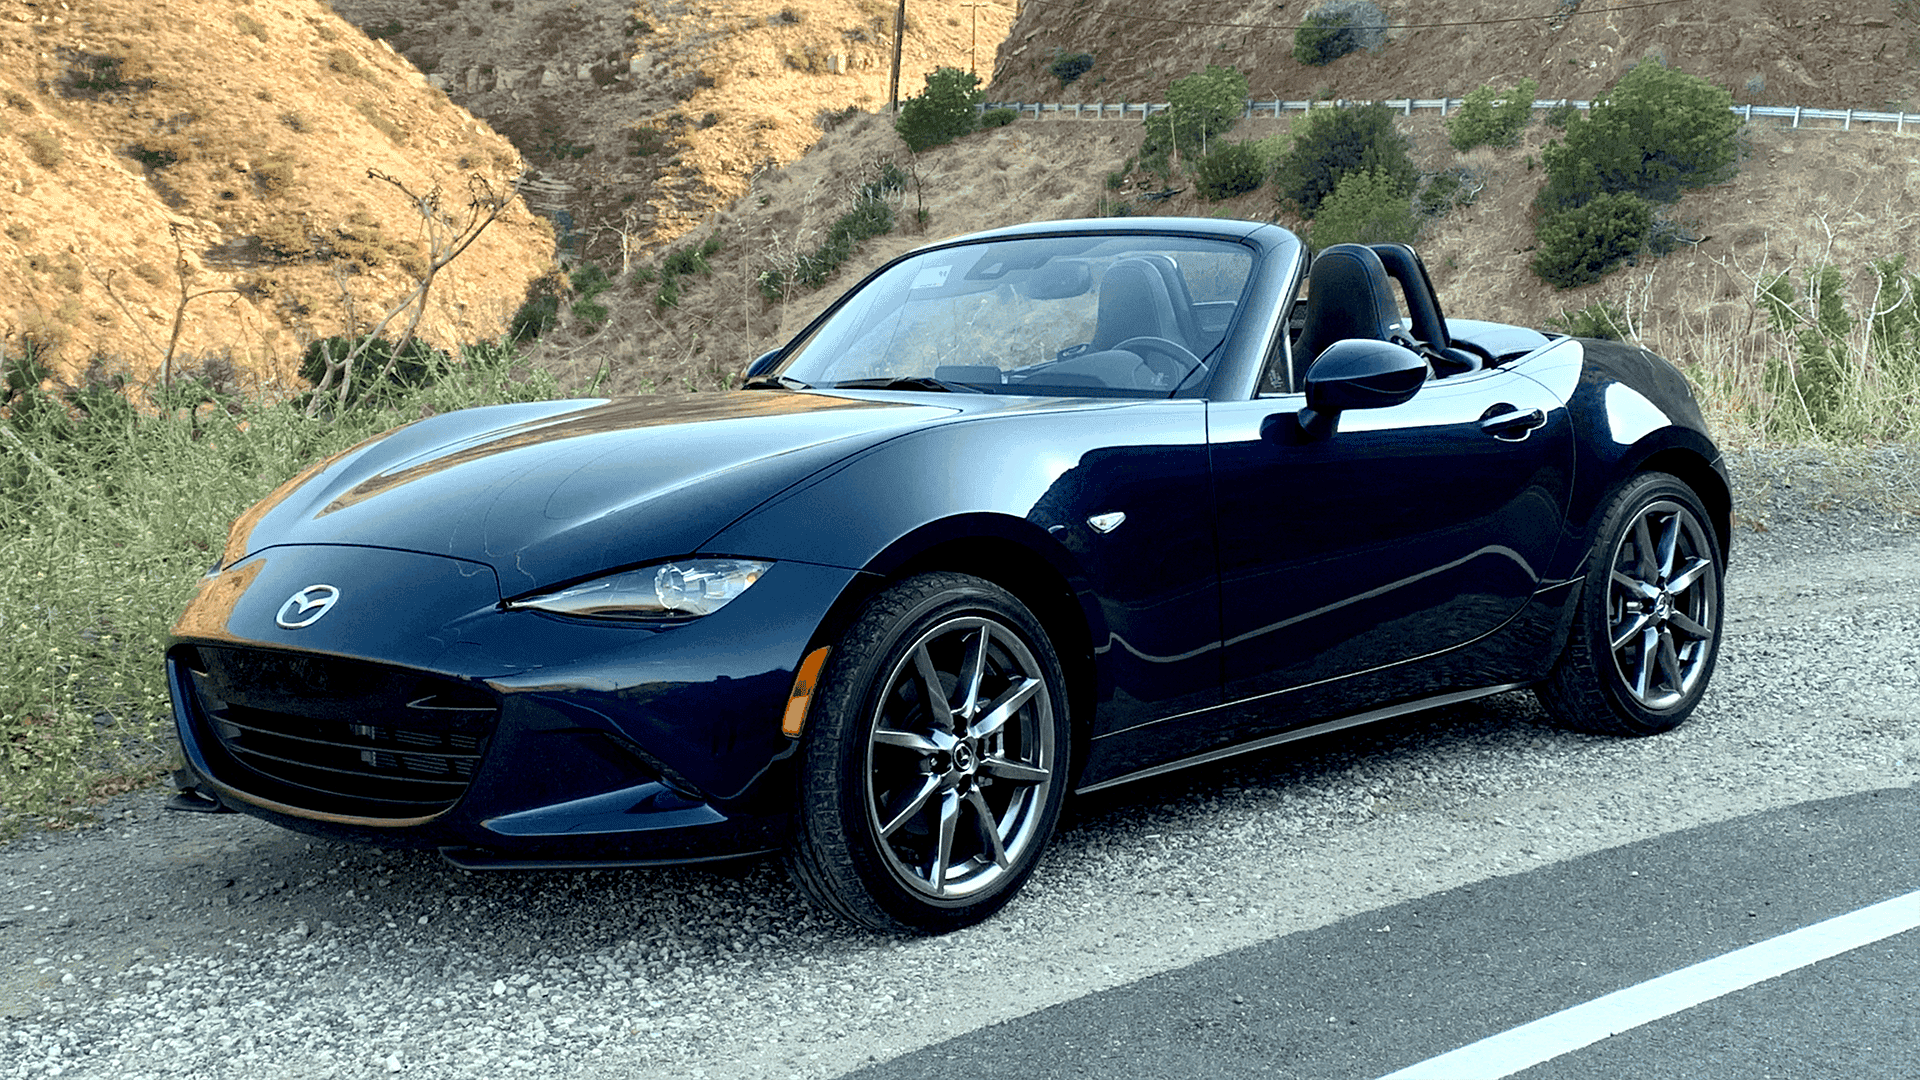 2021-mazda-mx-5-miata-review-still-a-pure-driver-s-car-after-32-years